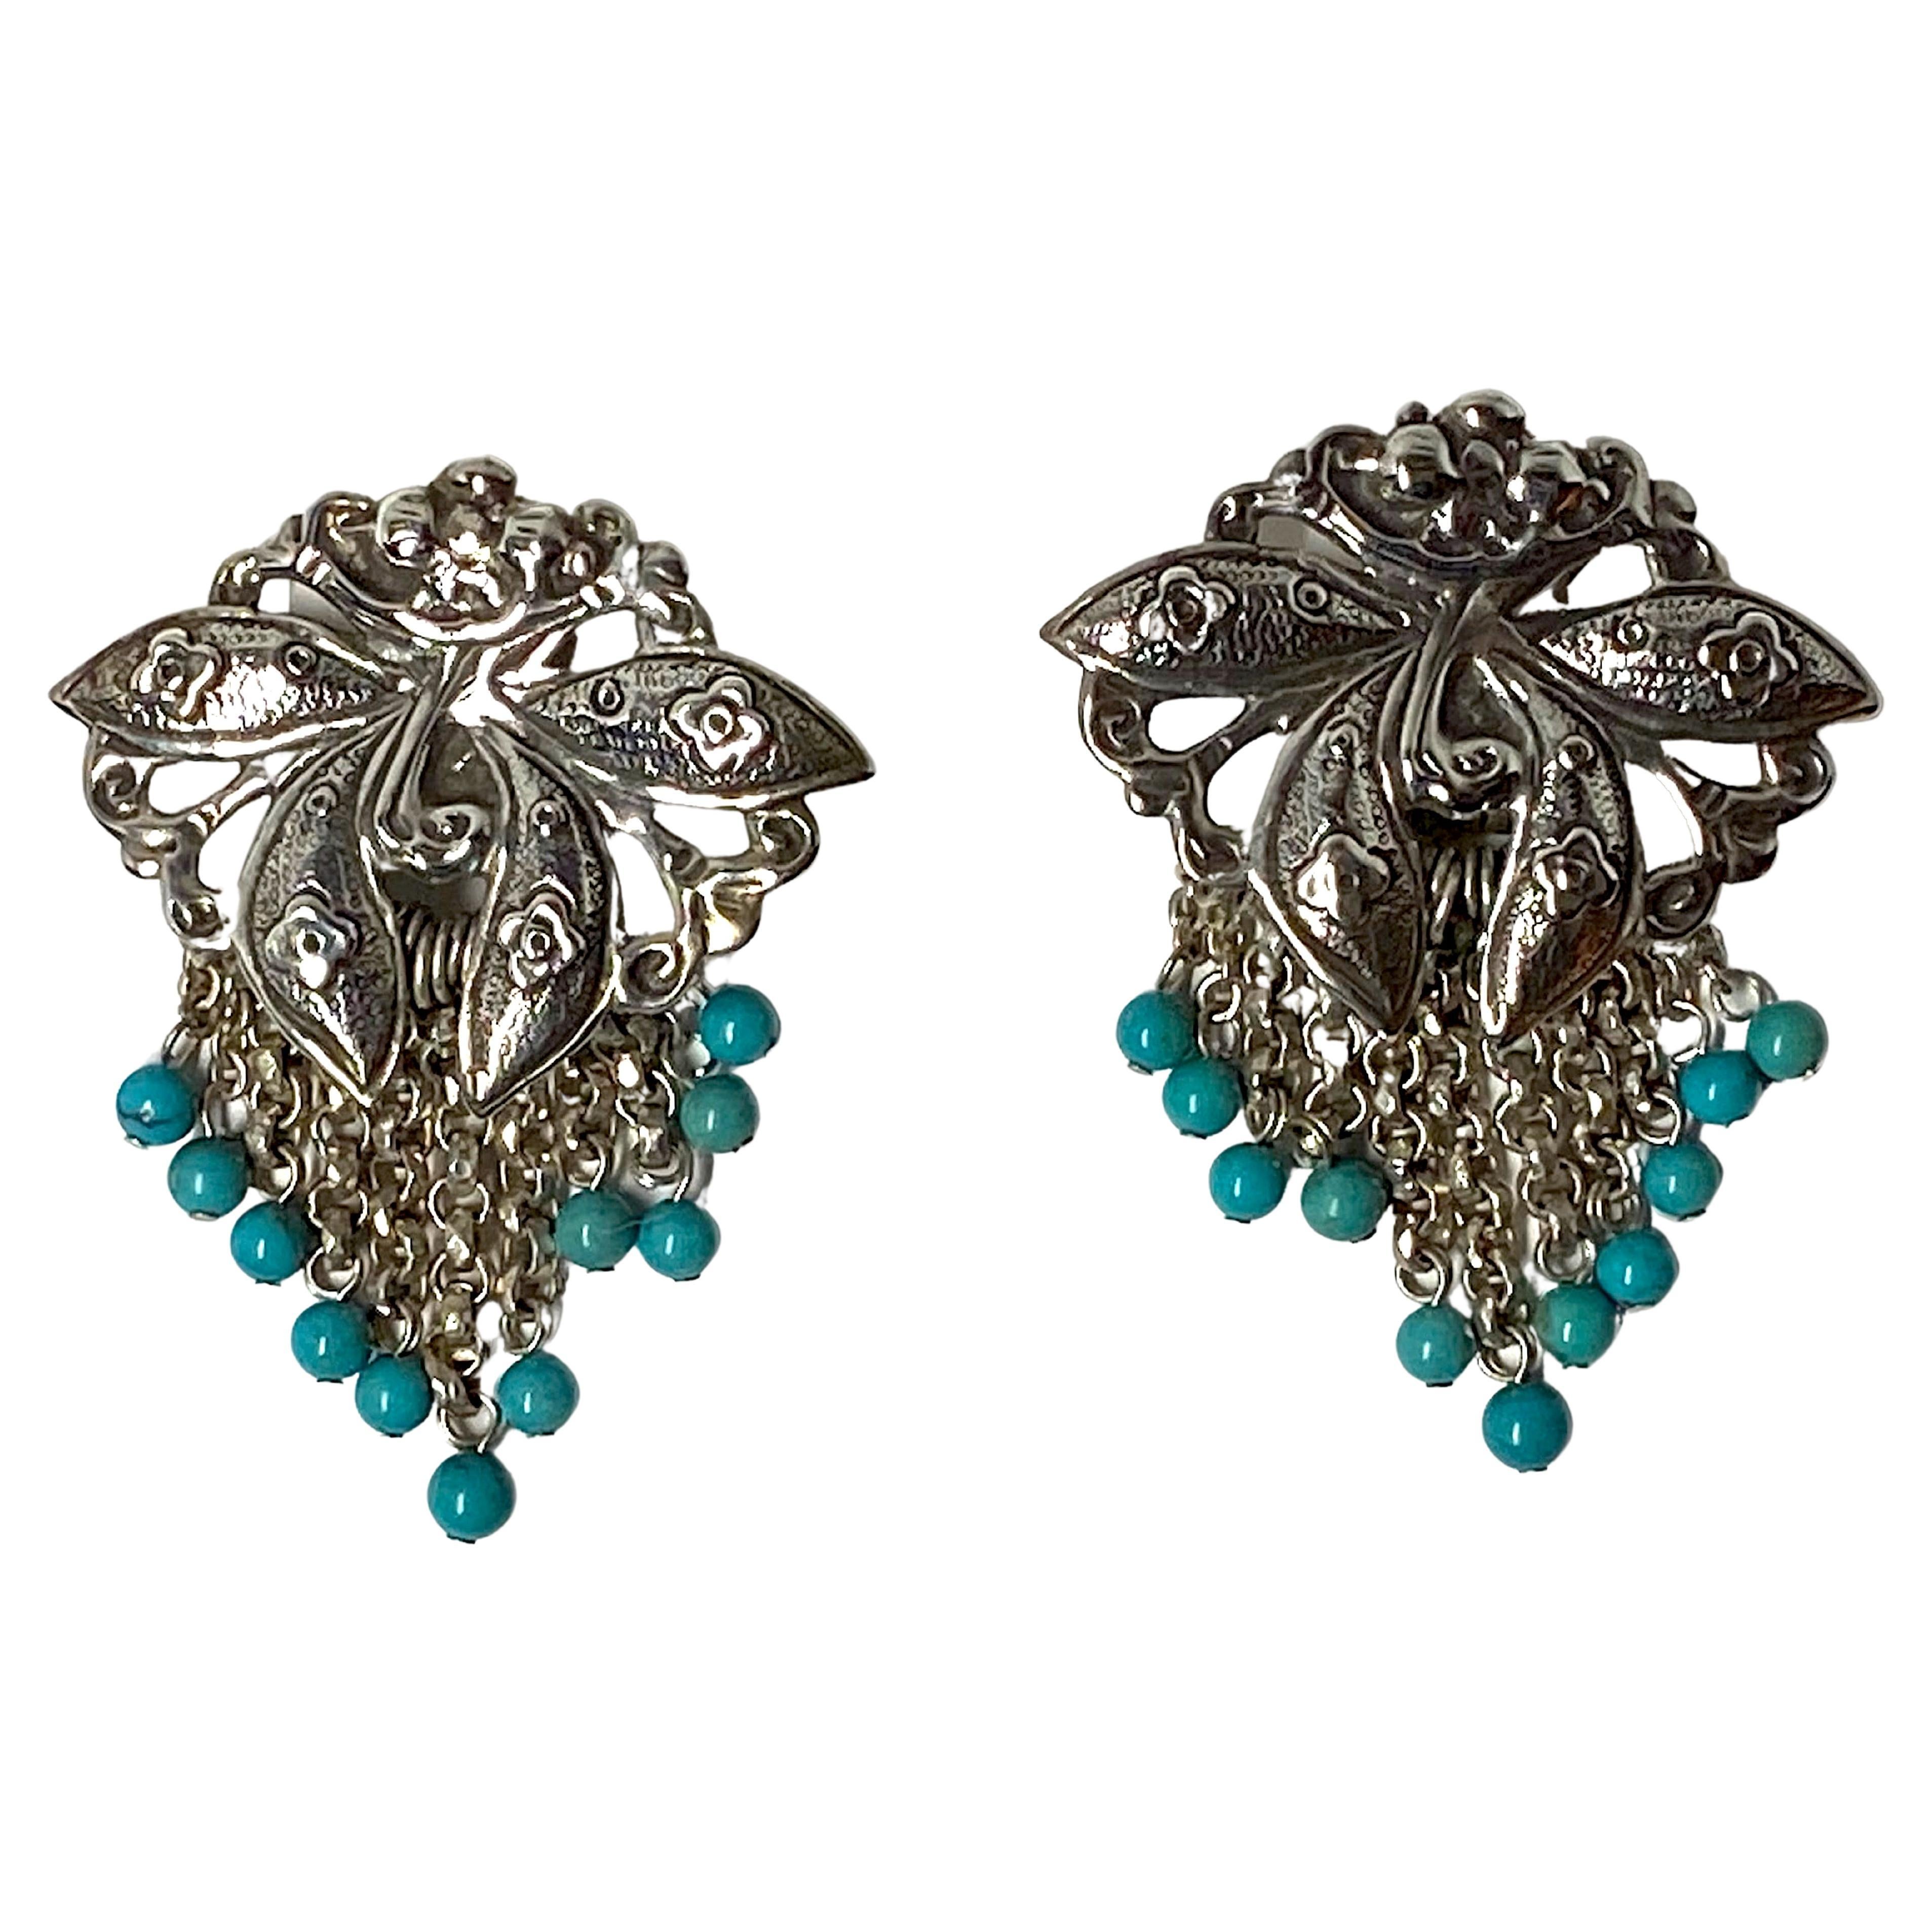 A lovely pair of sterling silver flower motif fringe earrings with turquoise beads from 1988 by famous American jewelry house Stephen Dweck. Each earring top is a stylized flower with four petals and has fringe chain descending from it finishing